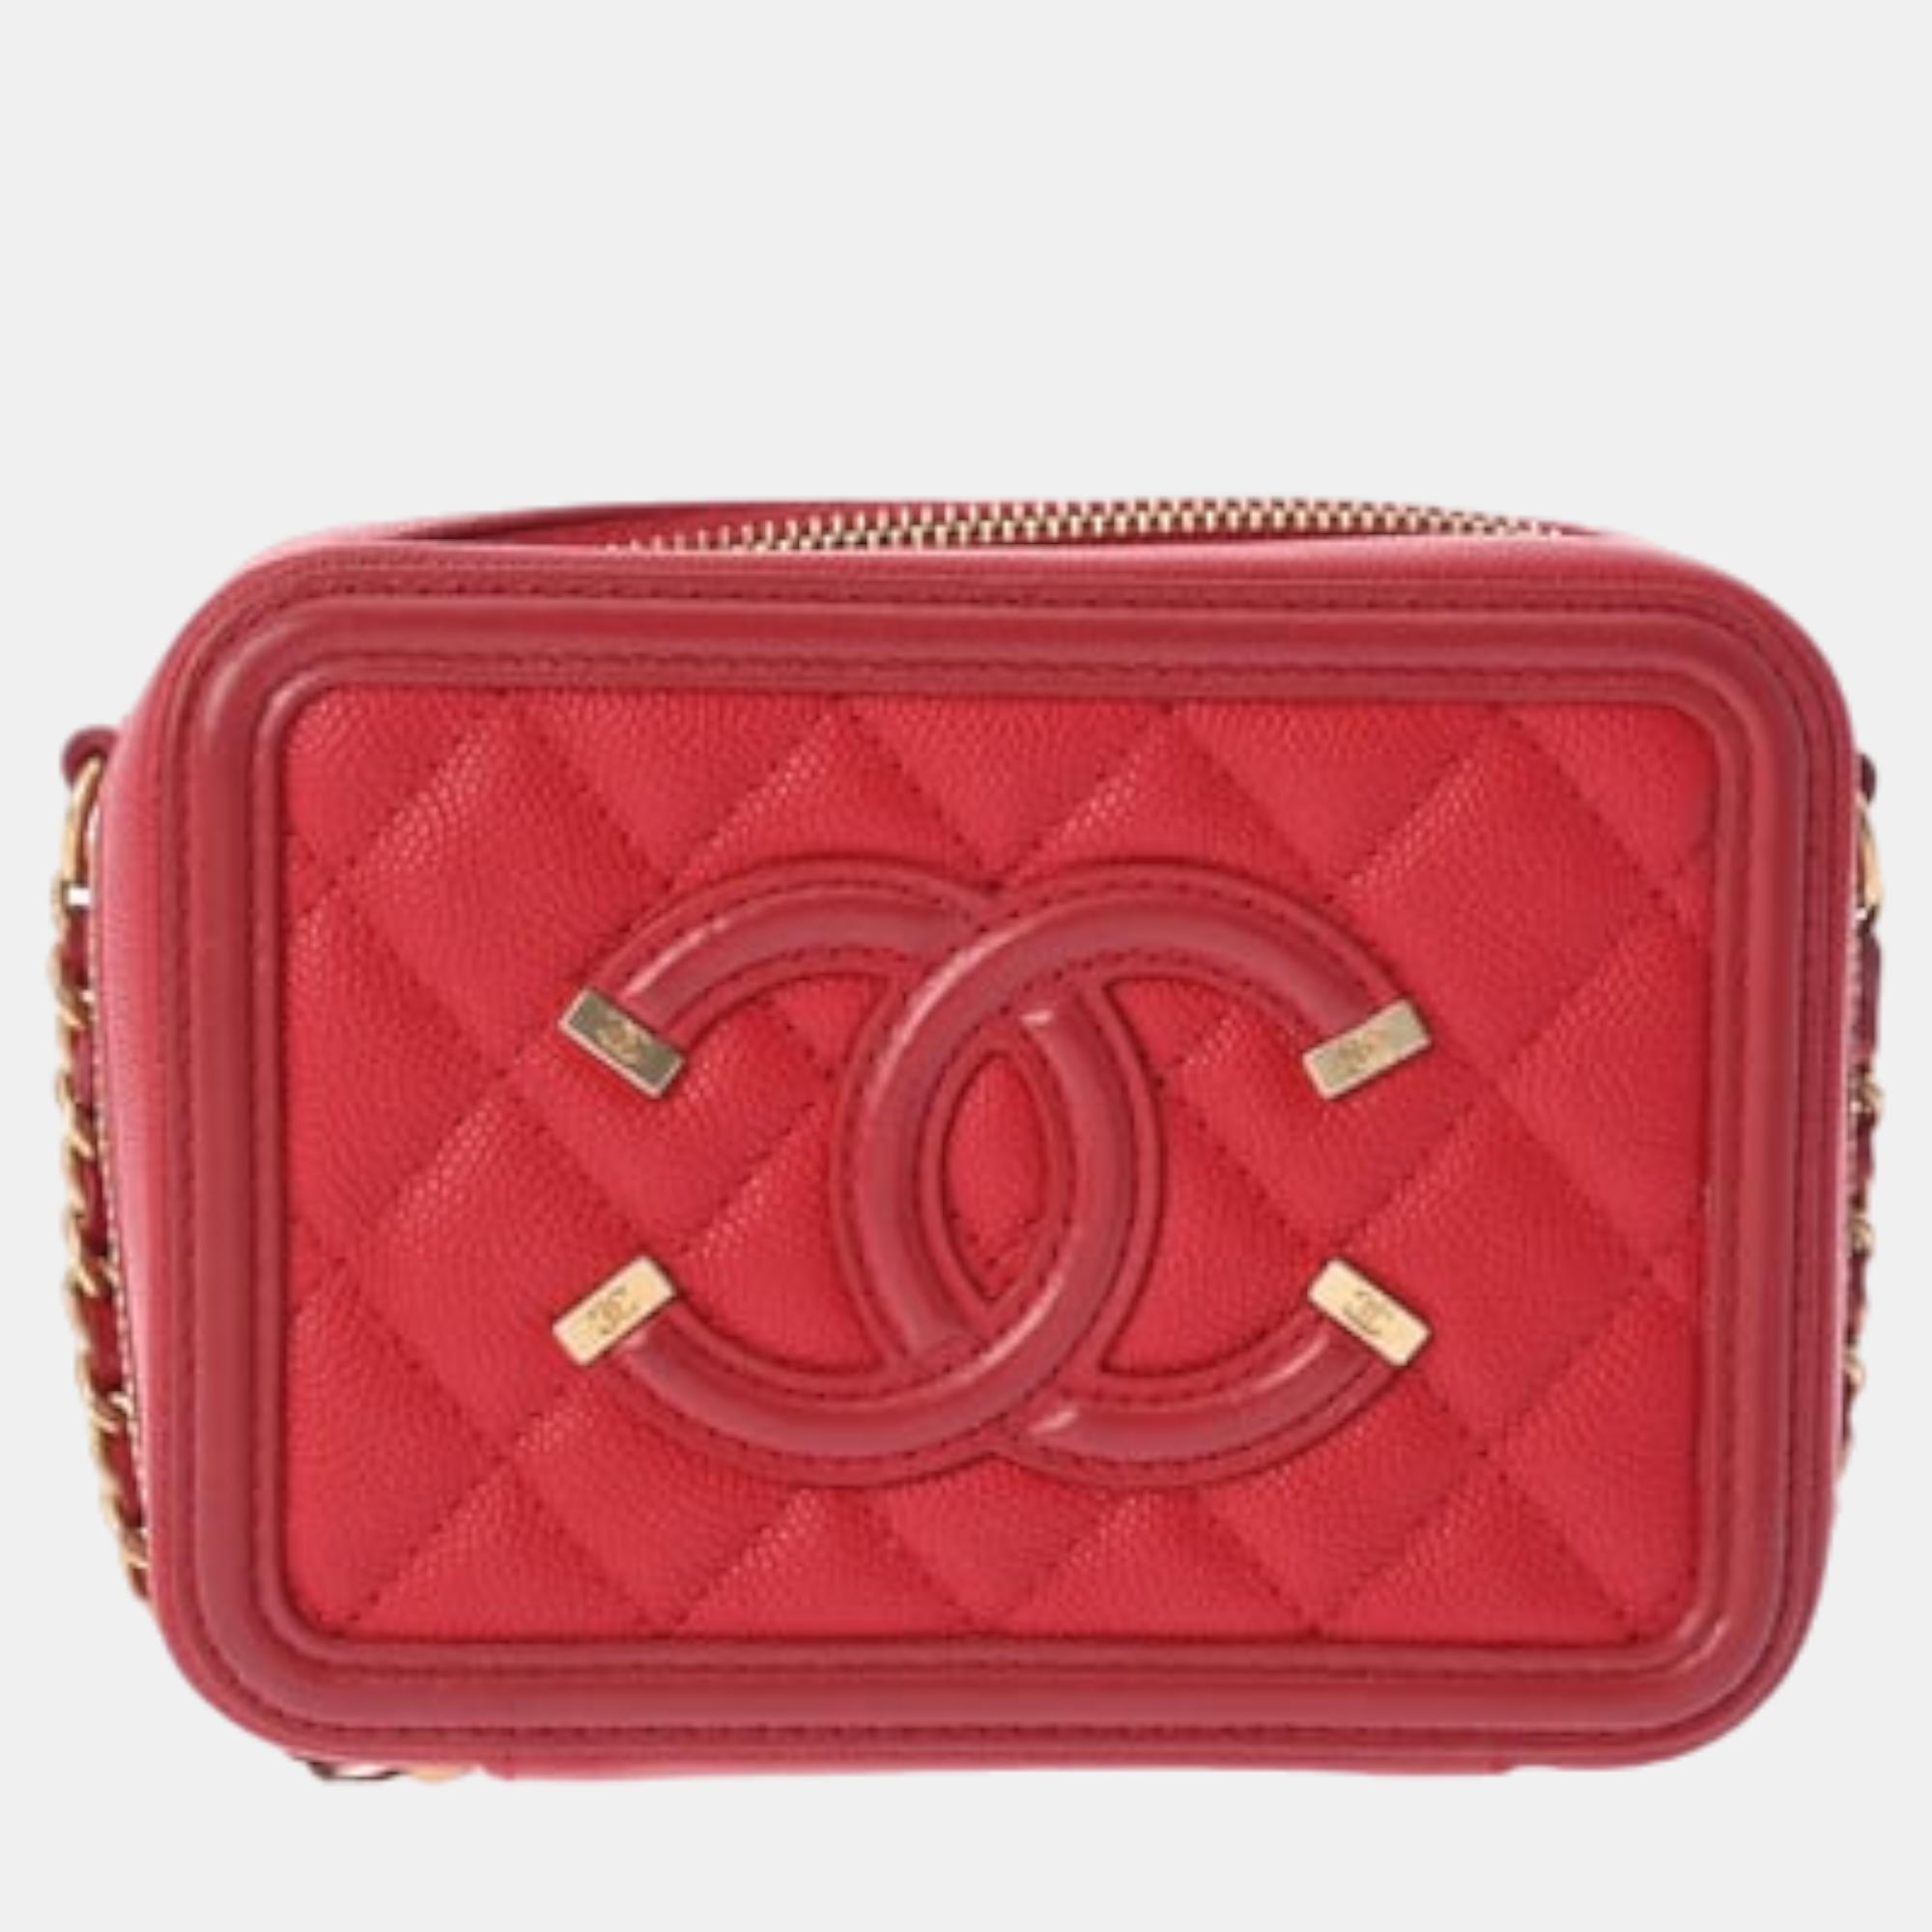 Chanel red leather small filigree shoulder bags